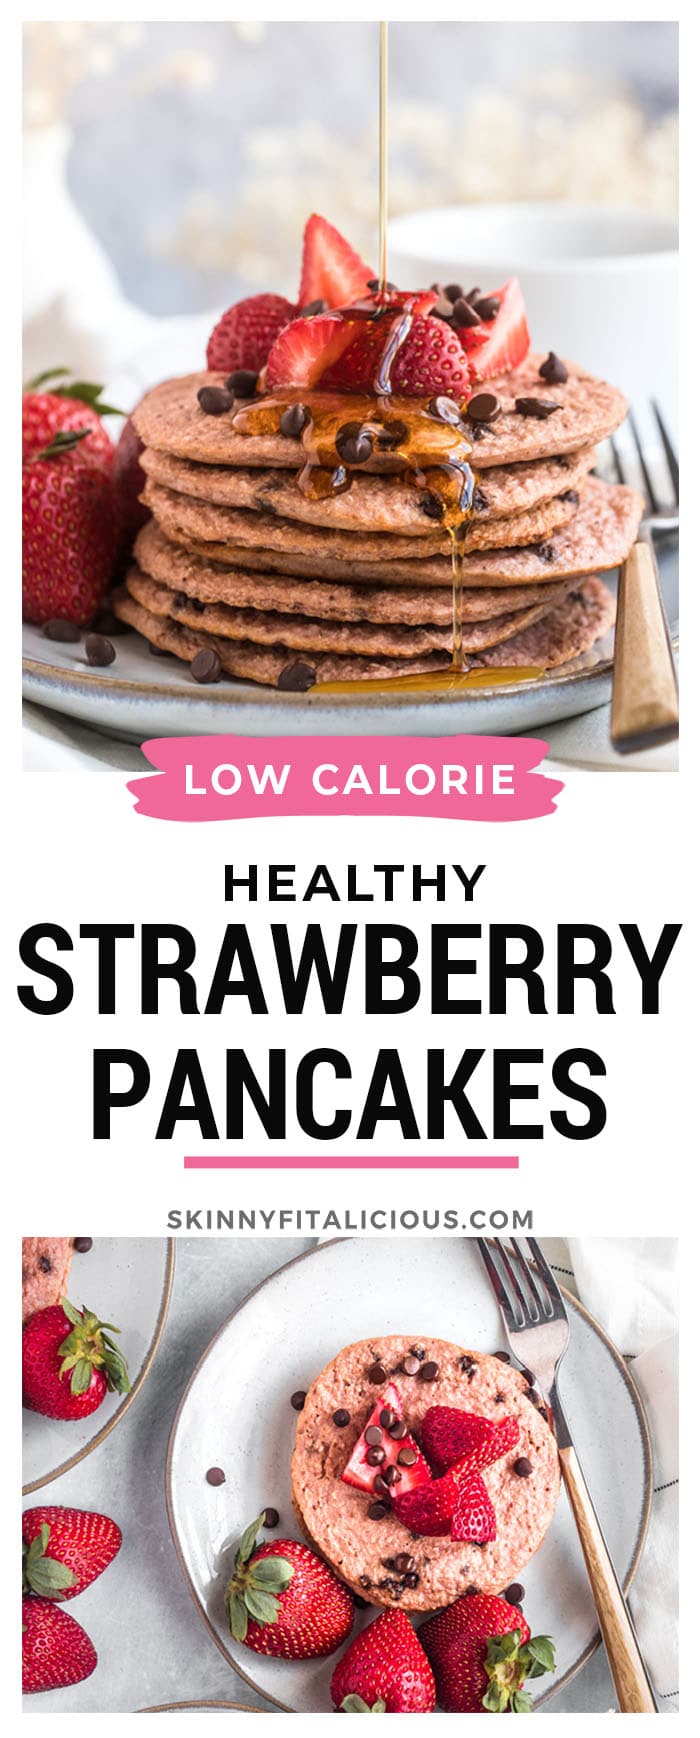 Healthy Strawberry Oat Chocolate Chip Pancakes made low calorie with gluten free oats, Greek yogurt, sweet strawberries with chunks of chocolate nestled in the batter.